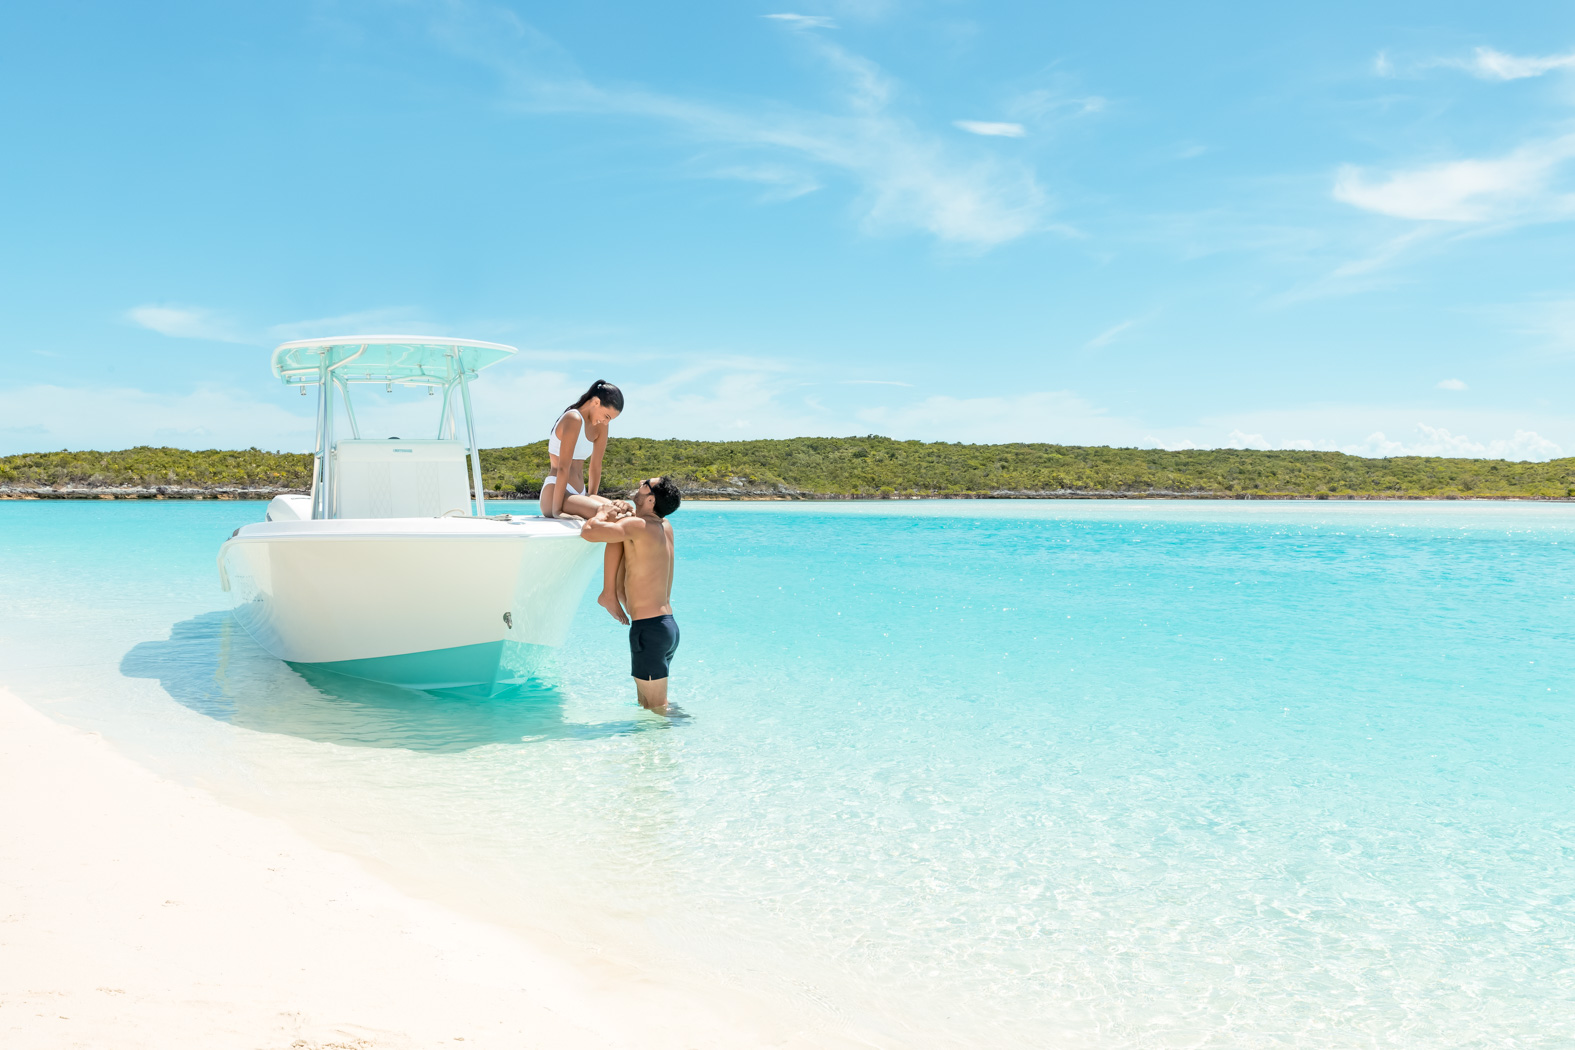 A man in swim trunks helps a woman in a swimsuit onto a white boat in clear shallow water near a sandy beach with a greenery-covered shoreline under a sunny, blue sky.